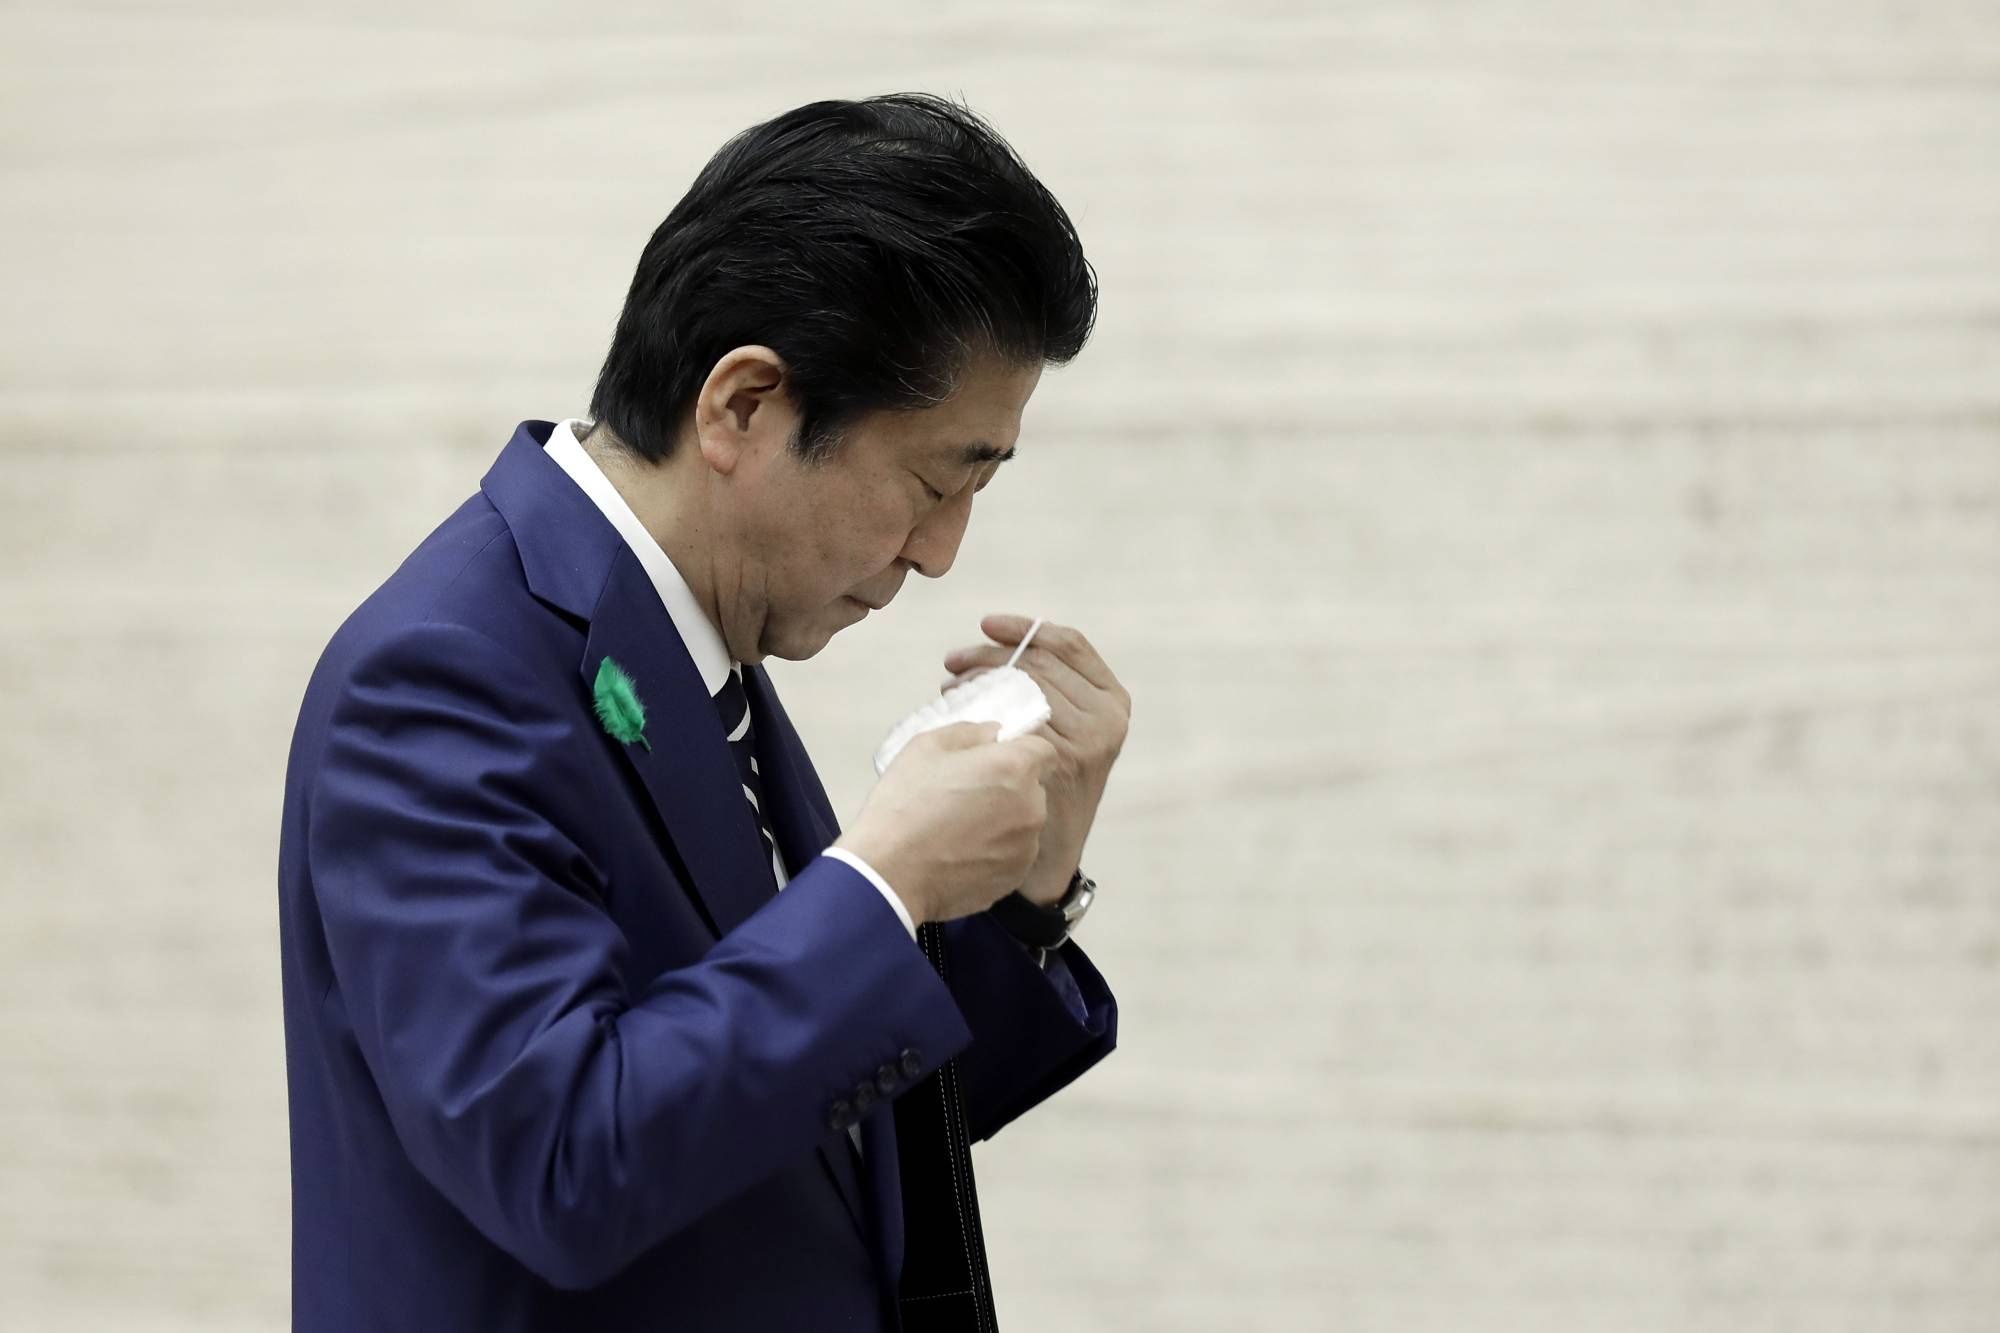 Prime Minister Shinzo Abe puts on a protective mask as he departs a news conference in Tokyo on Friday. | BLOOMBERG